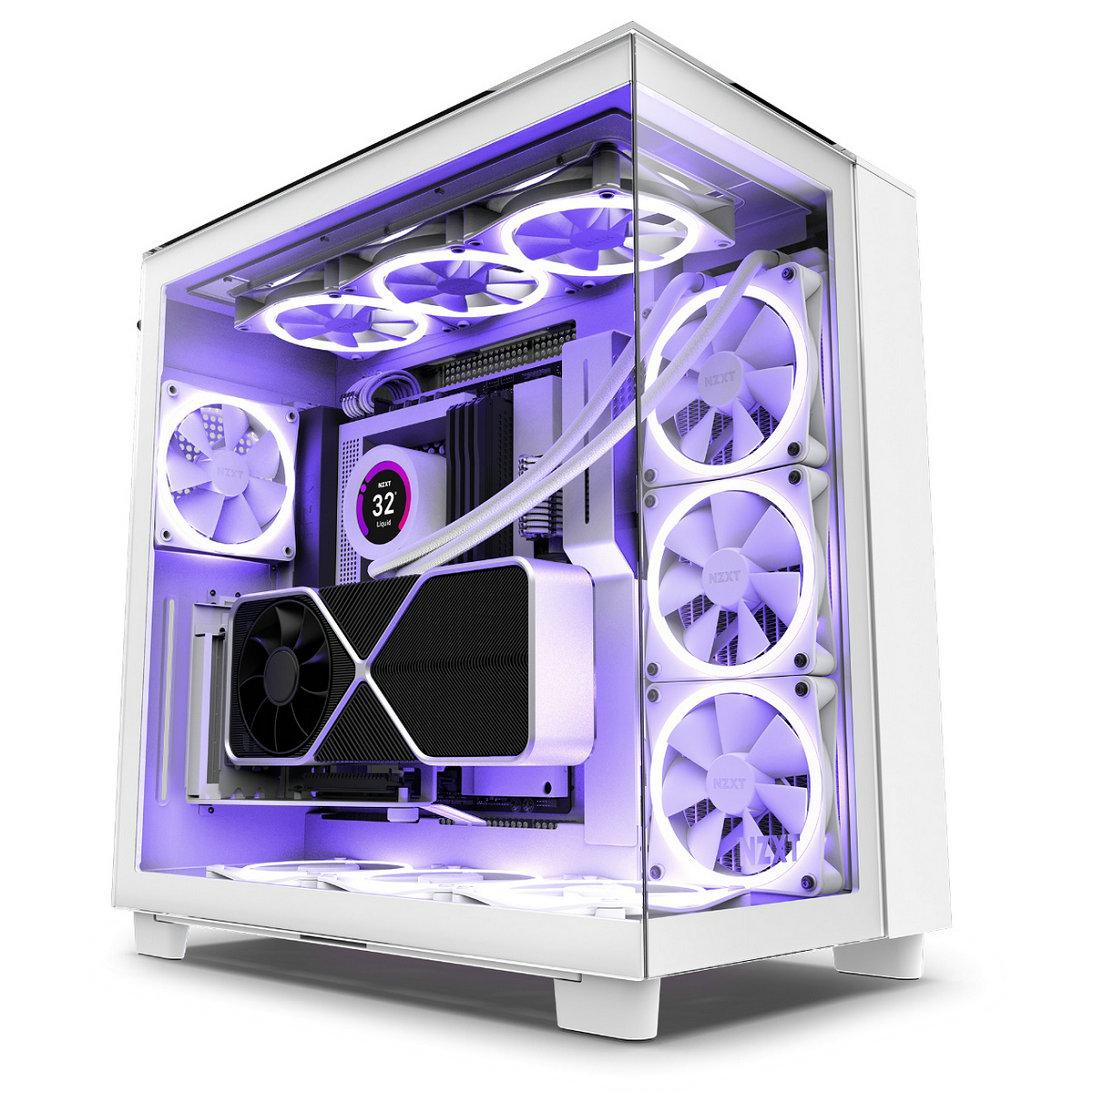 NZXT launches new H9 Elite and H9 Flow mid-tower cases